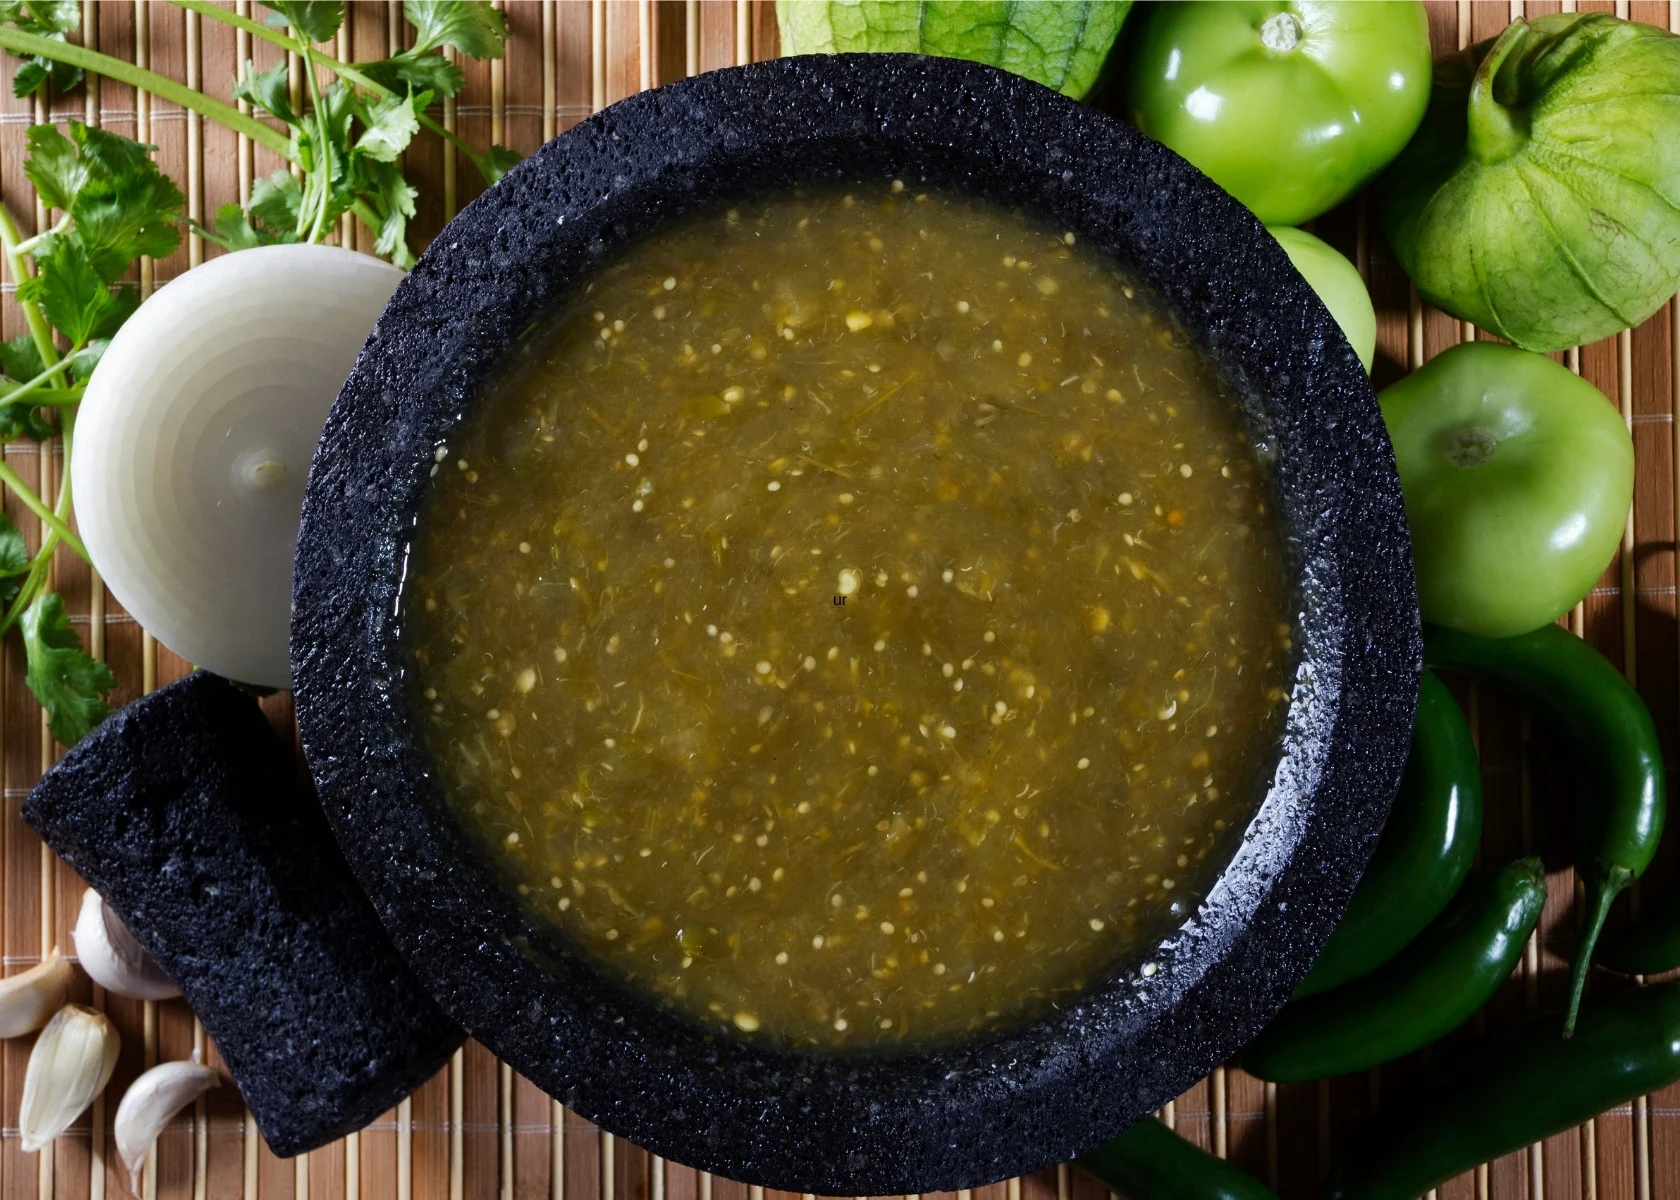 Salsa verde in large dark colored mortar and pestle next to fresh tomatillos and onion.